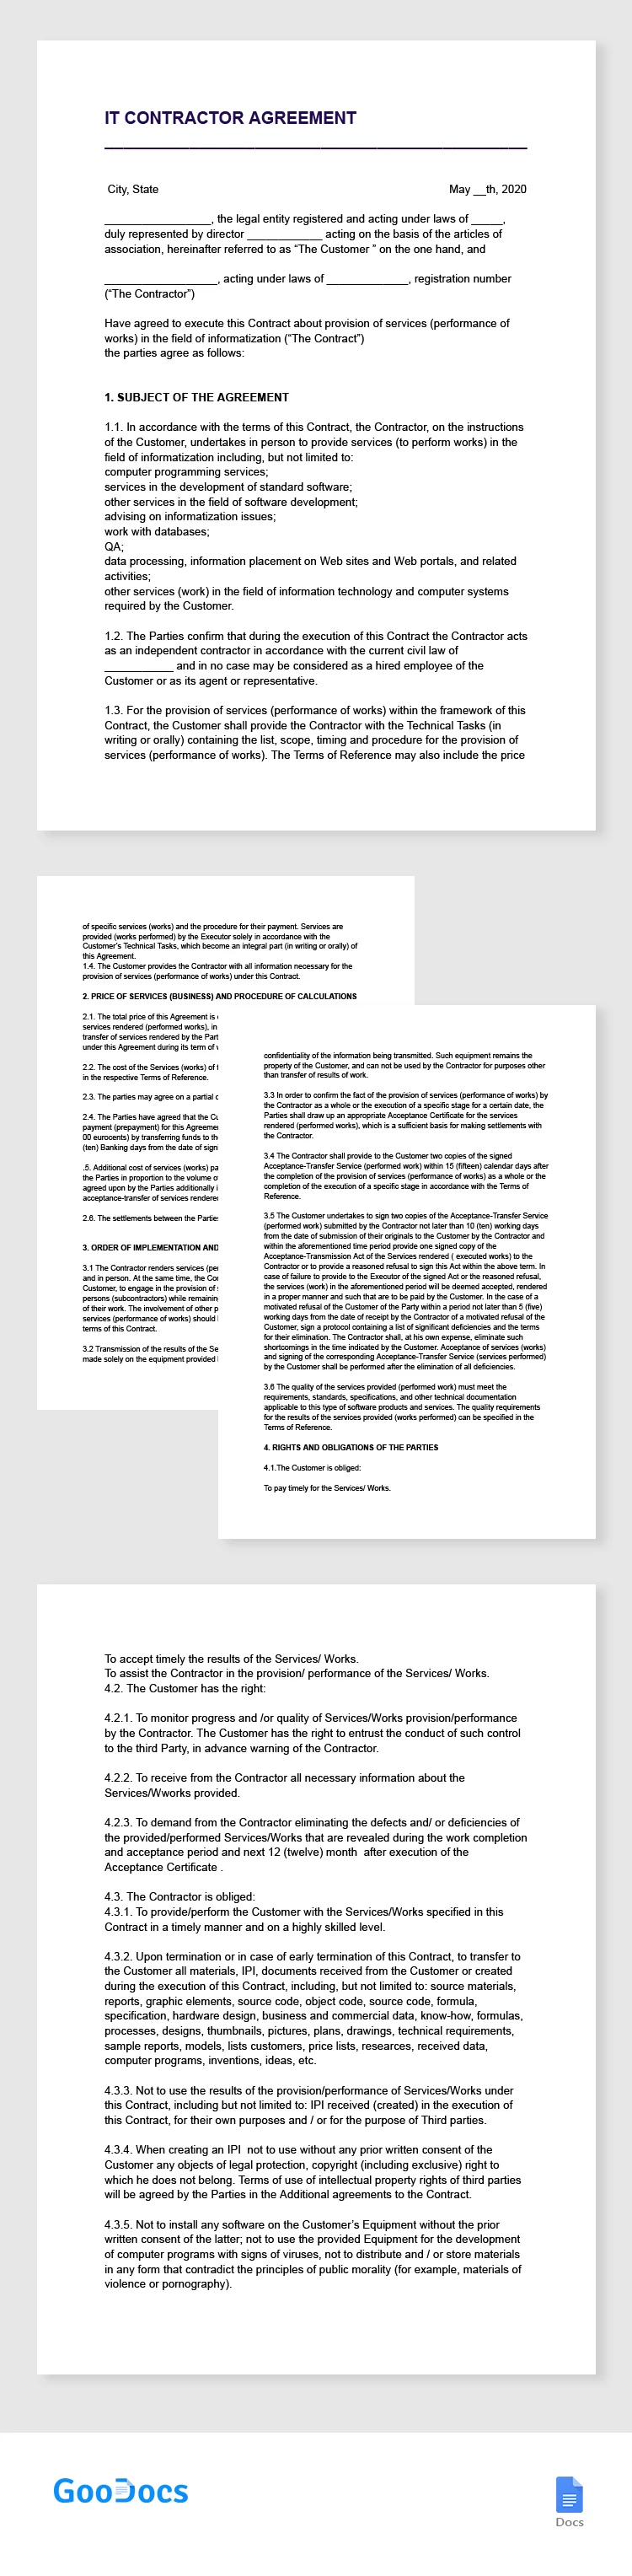 IT Contractor Agreement - free Google Docs Template - 10066304